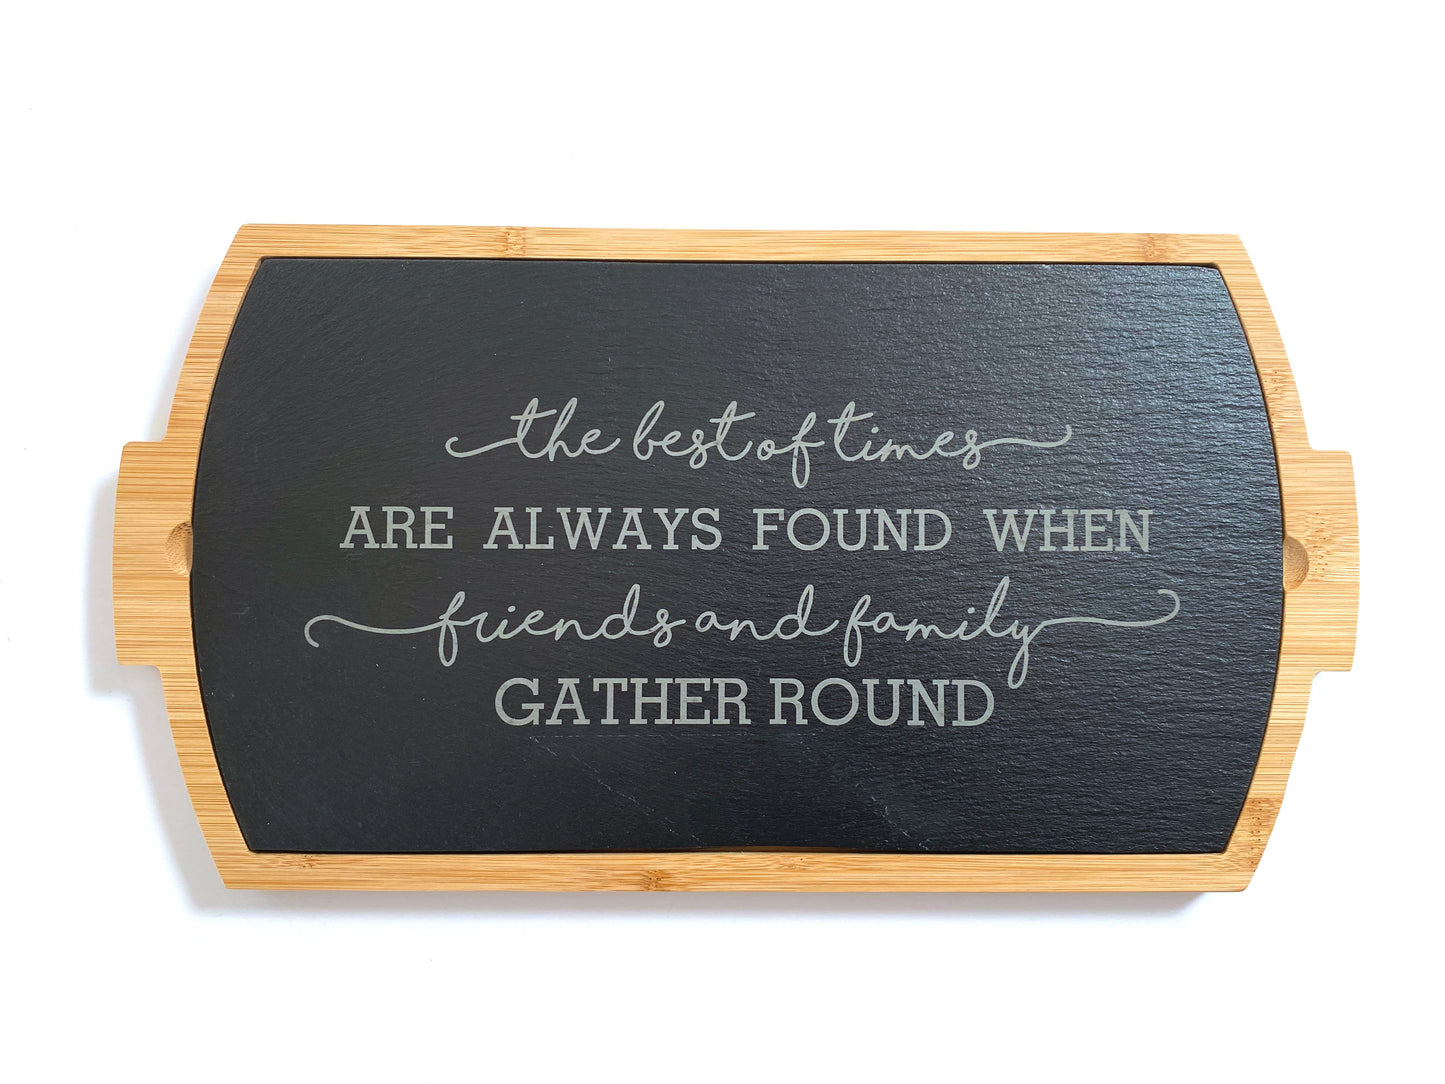 Gather Round Slate and Bamboo Serving Tray